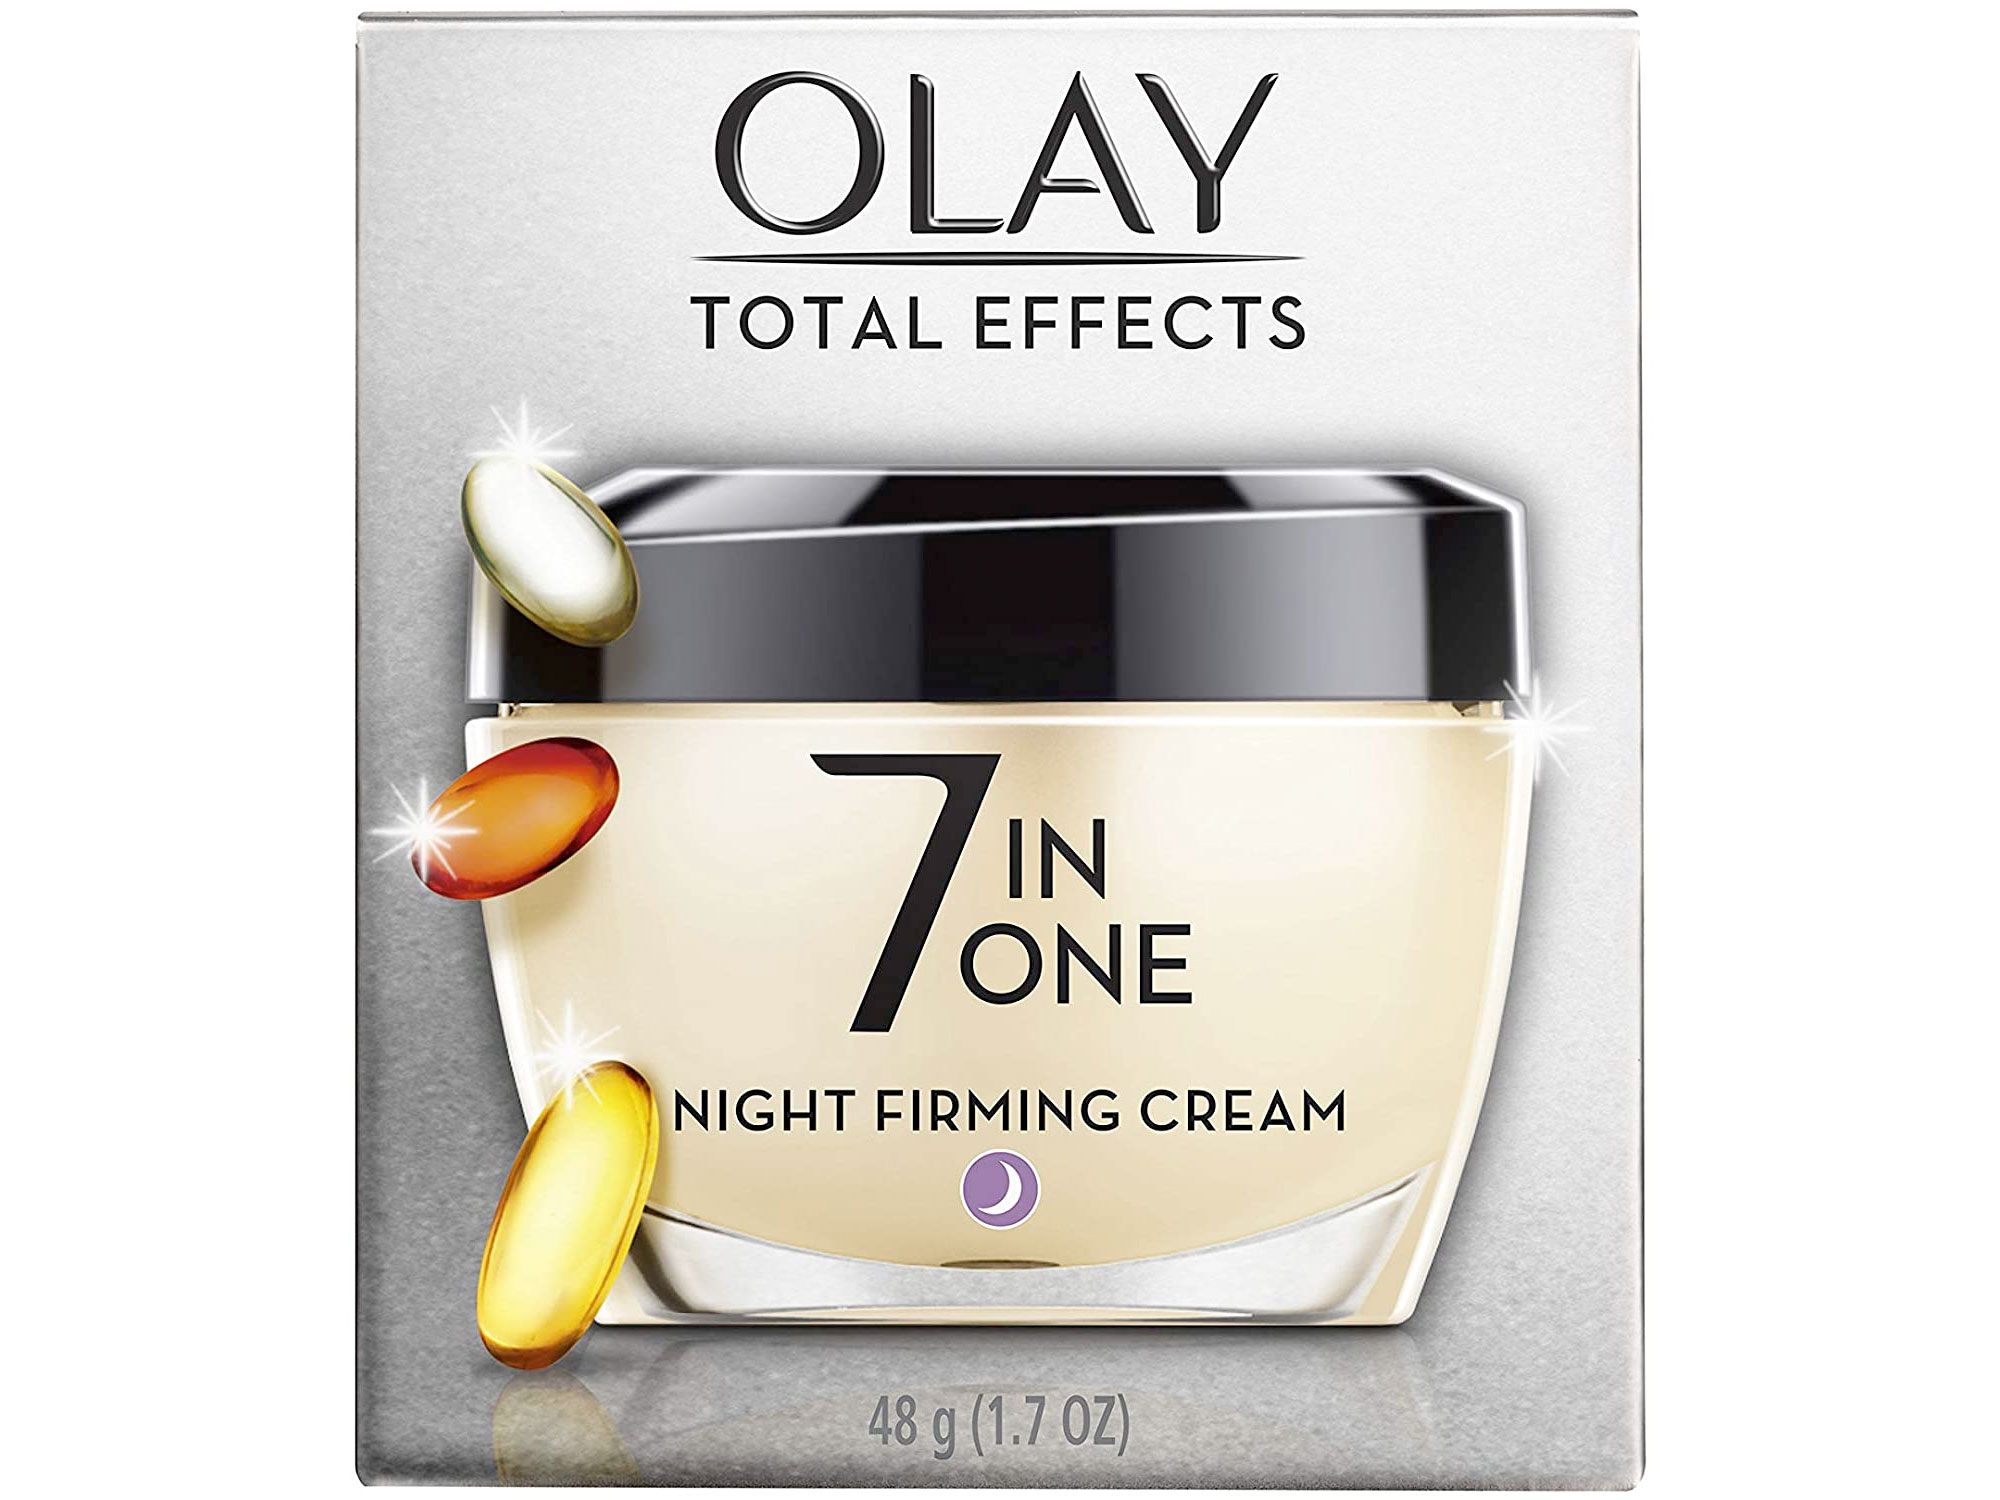 Amazon：Olay Total Effects Night Firming Cream(50ml)只賣$7.56